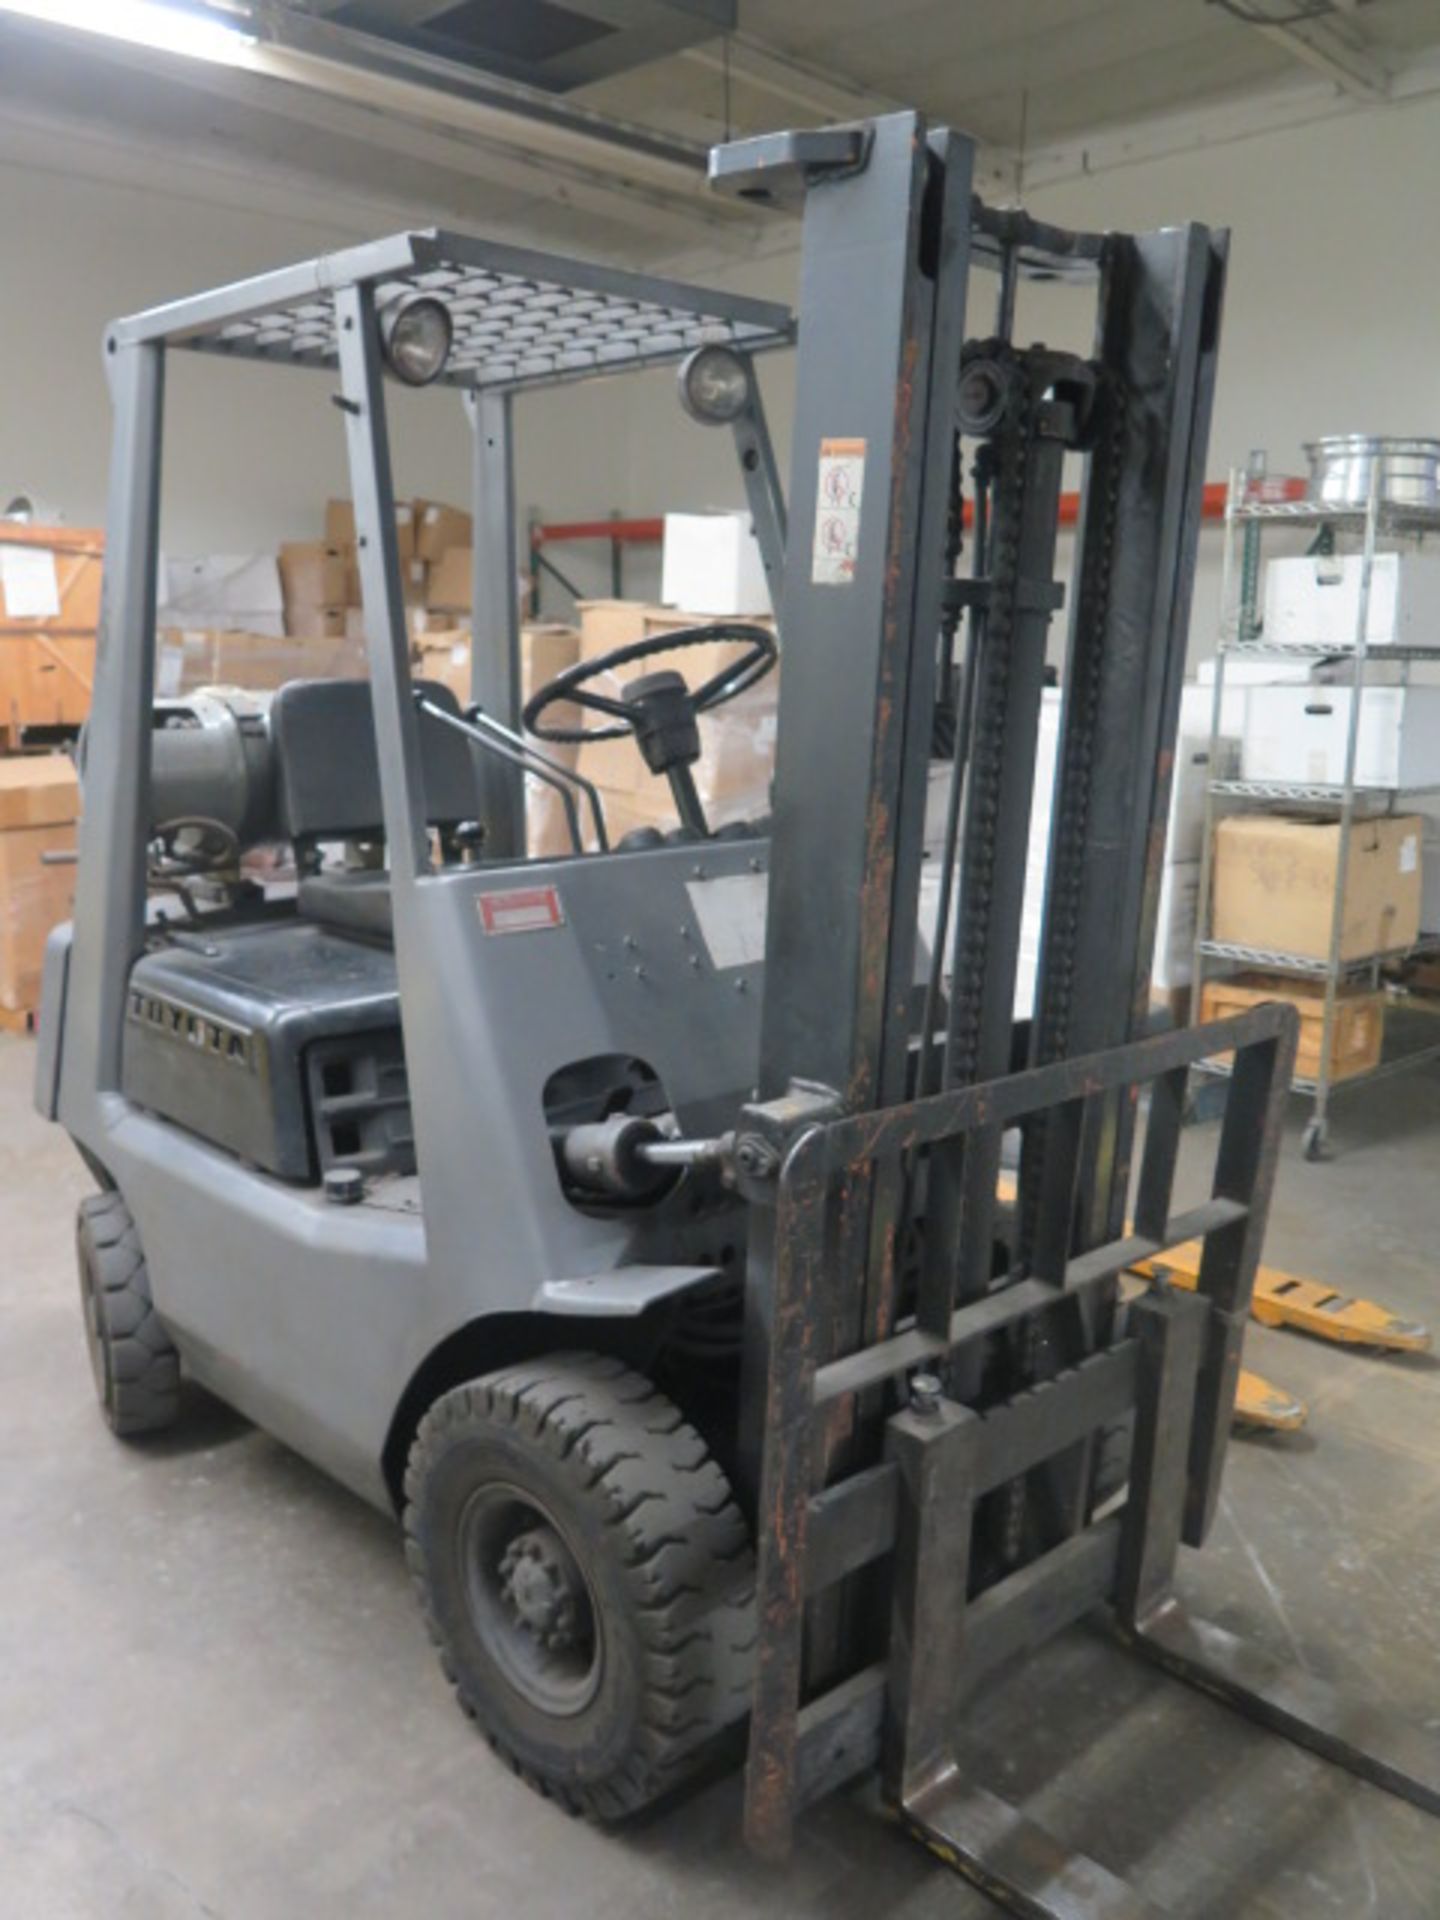 Toyota F3 2200 Lb Cap LPG Forklift w/ 2-Stage Mast, Solid Yard Tires - Image 3 of 8